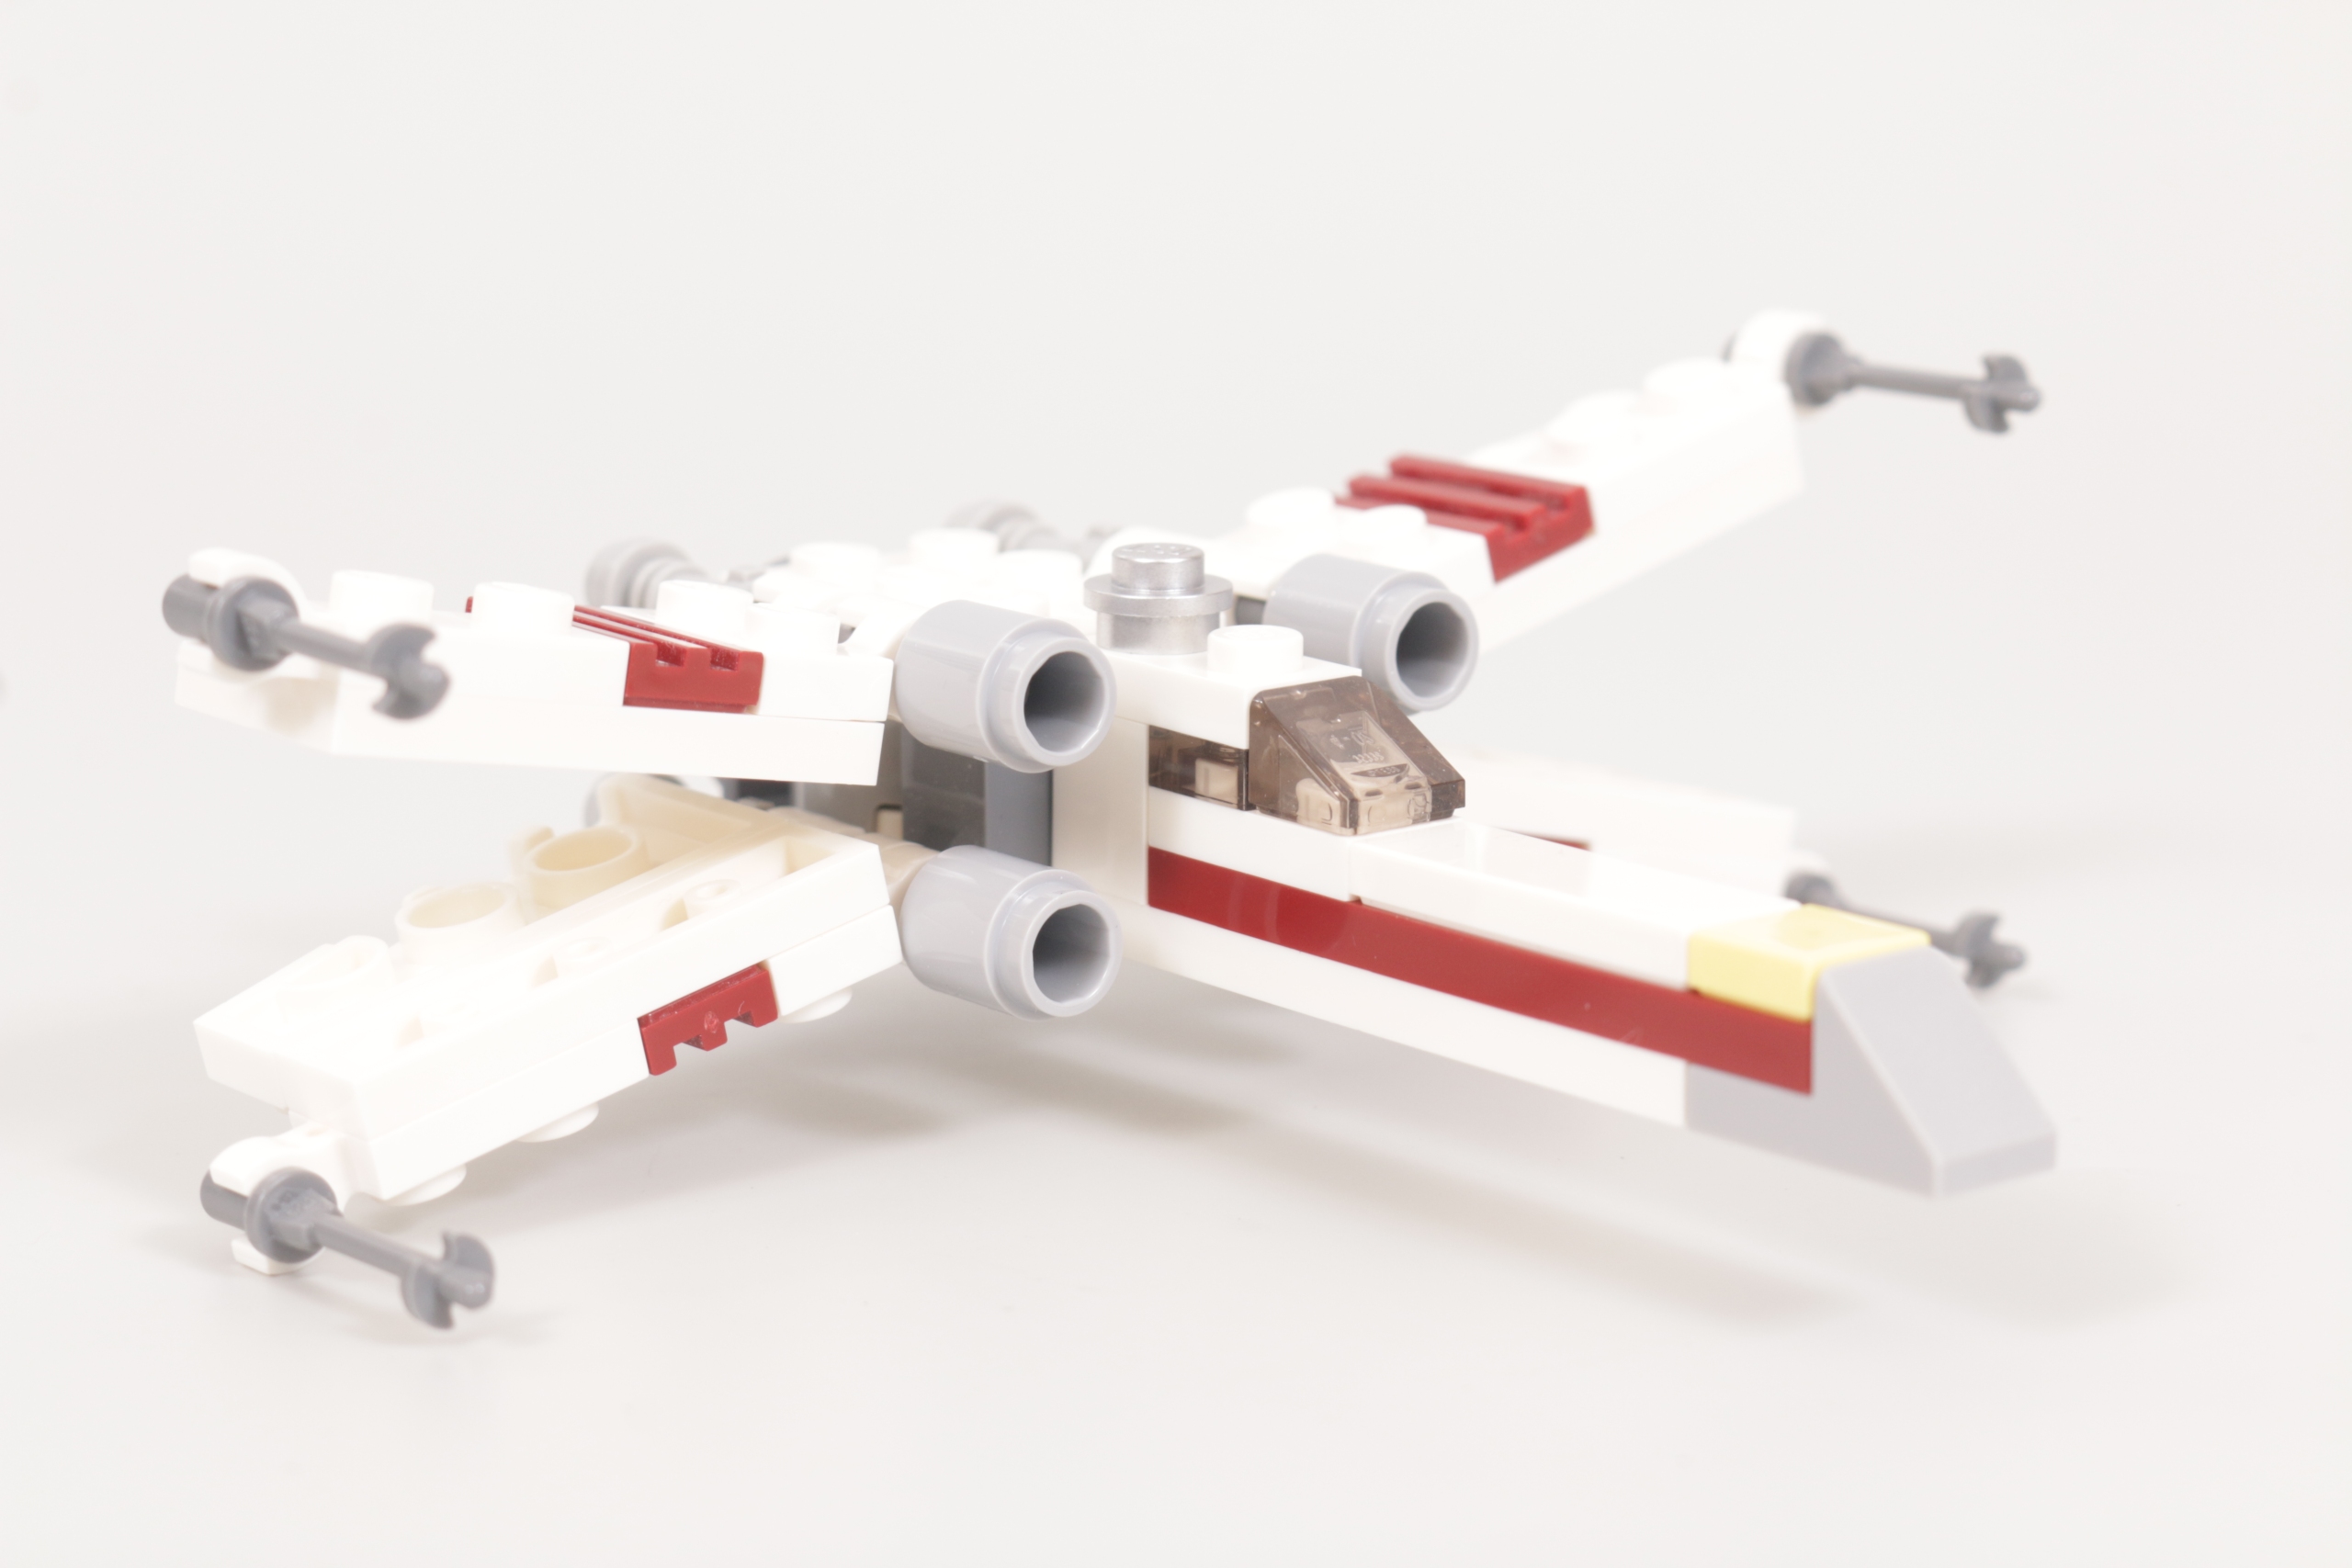 LEGO Star Wars X-Wing Starfighter 30654 Building Toy Set